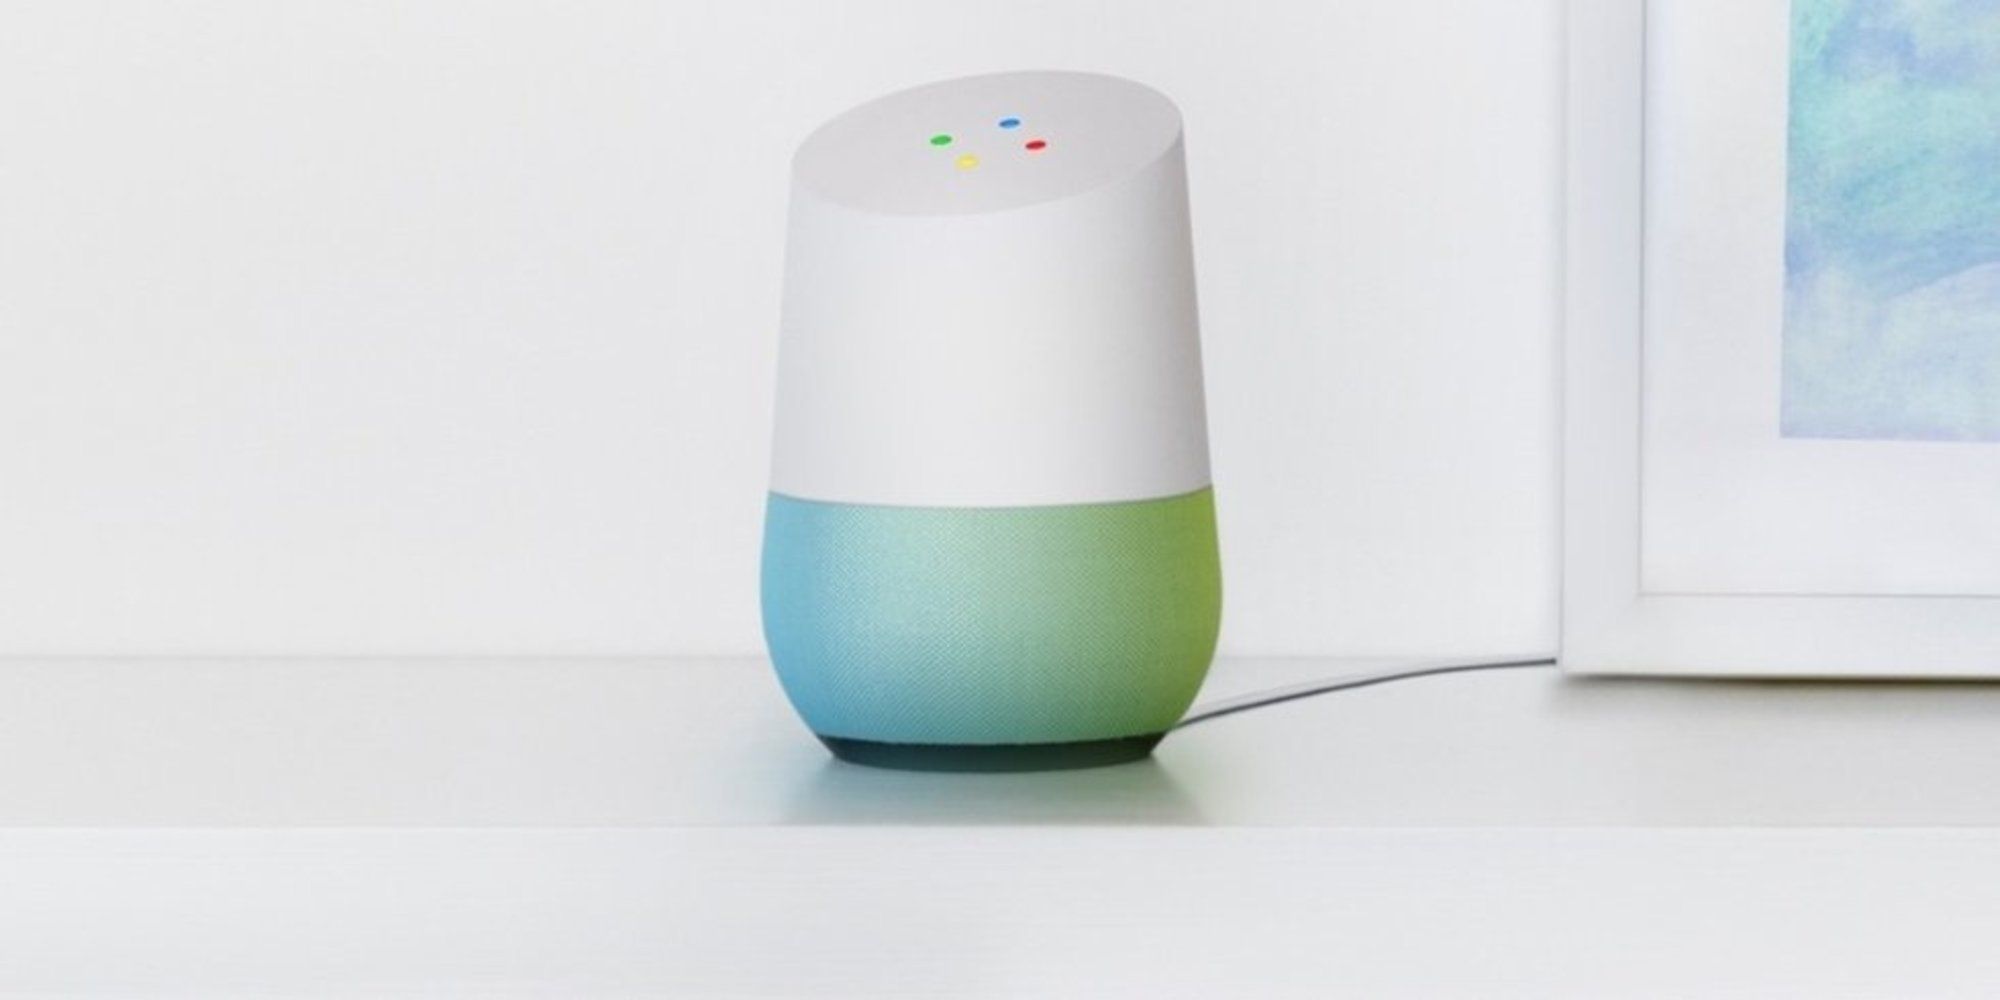 google home assistant